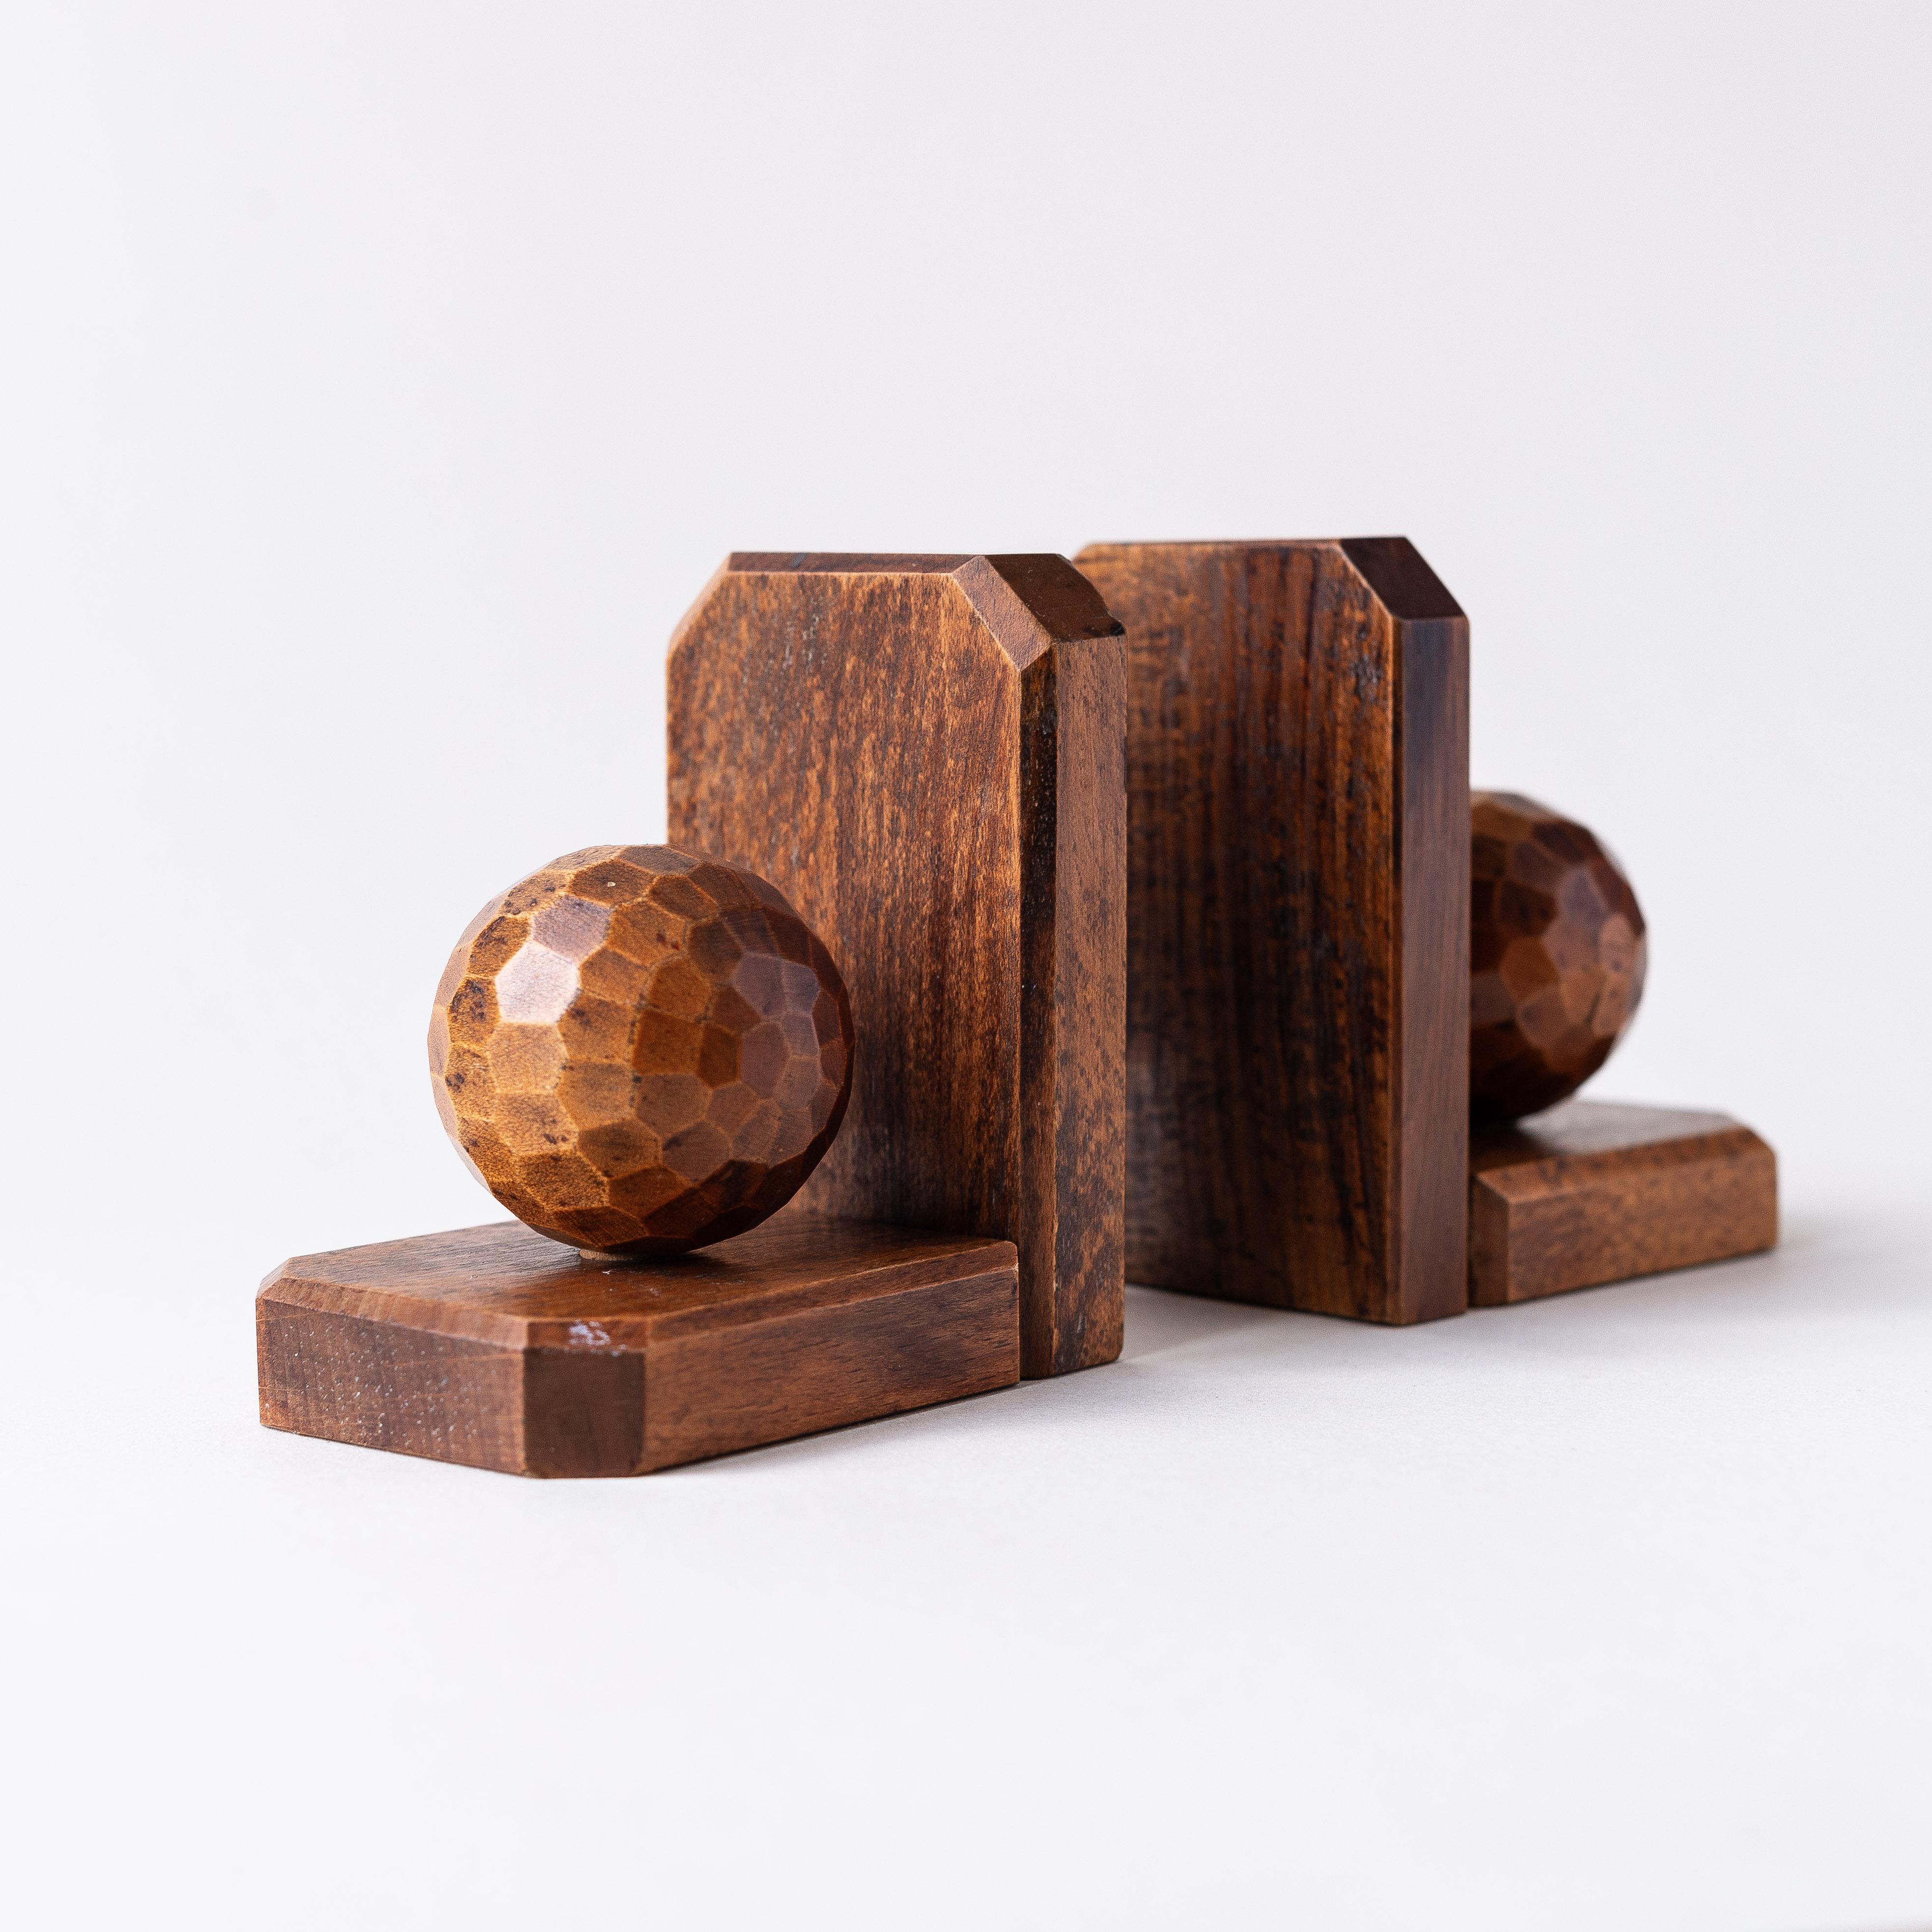 Art Deco Bookends made of wood and figuring golf balls.

In perfect condition with a beautiful patina.

Would be perfect placed on a desk or shelves, to add a touch of sculptural design around the books.

